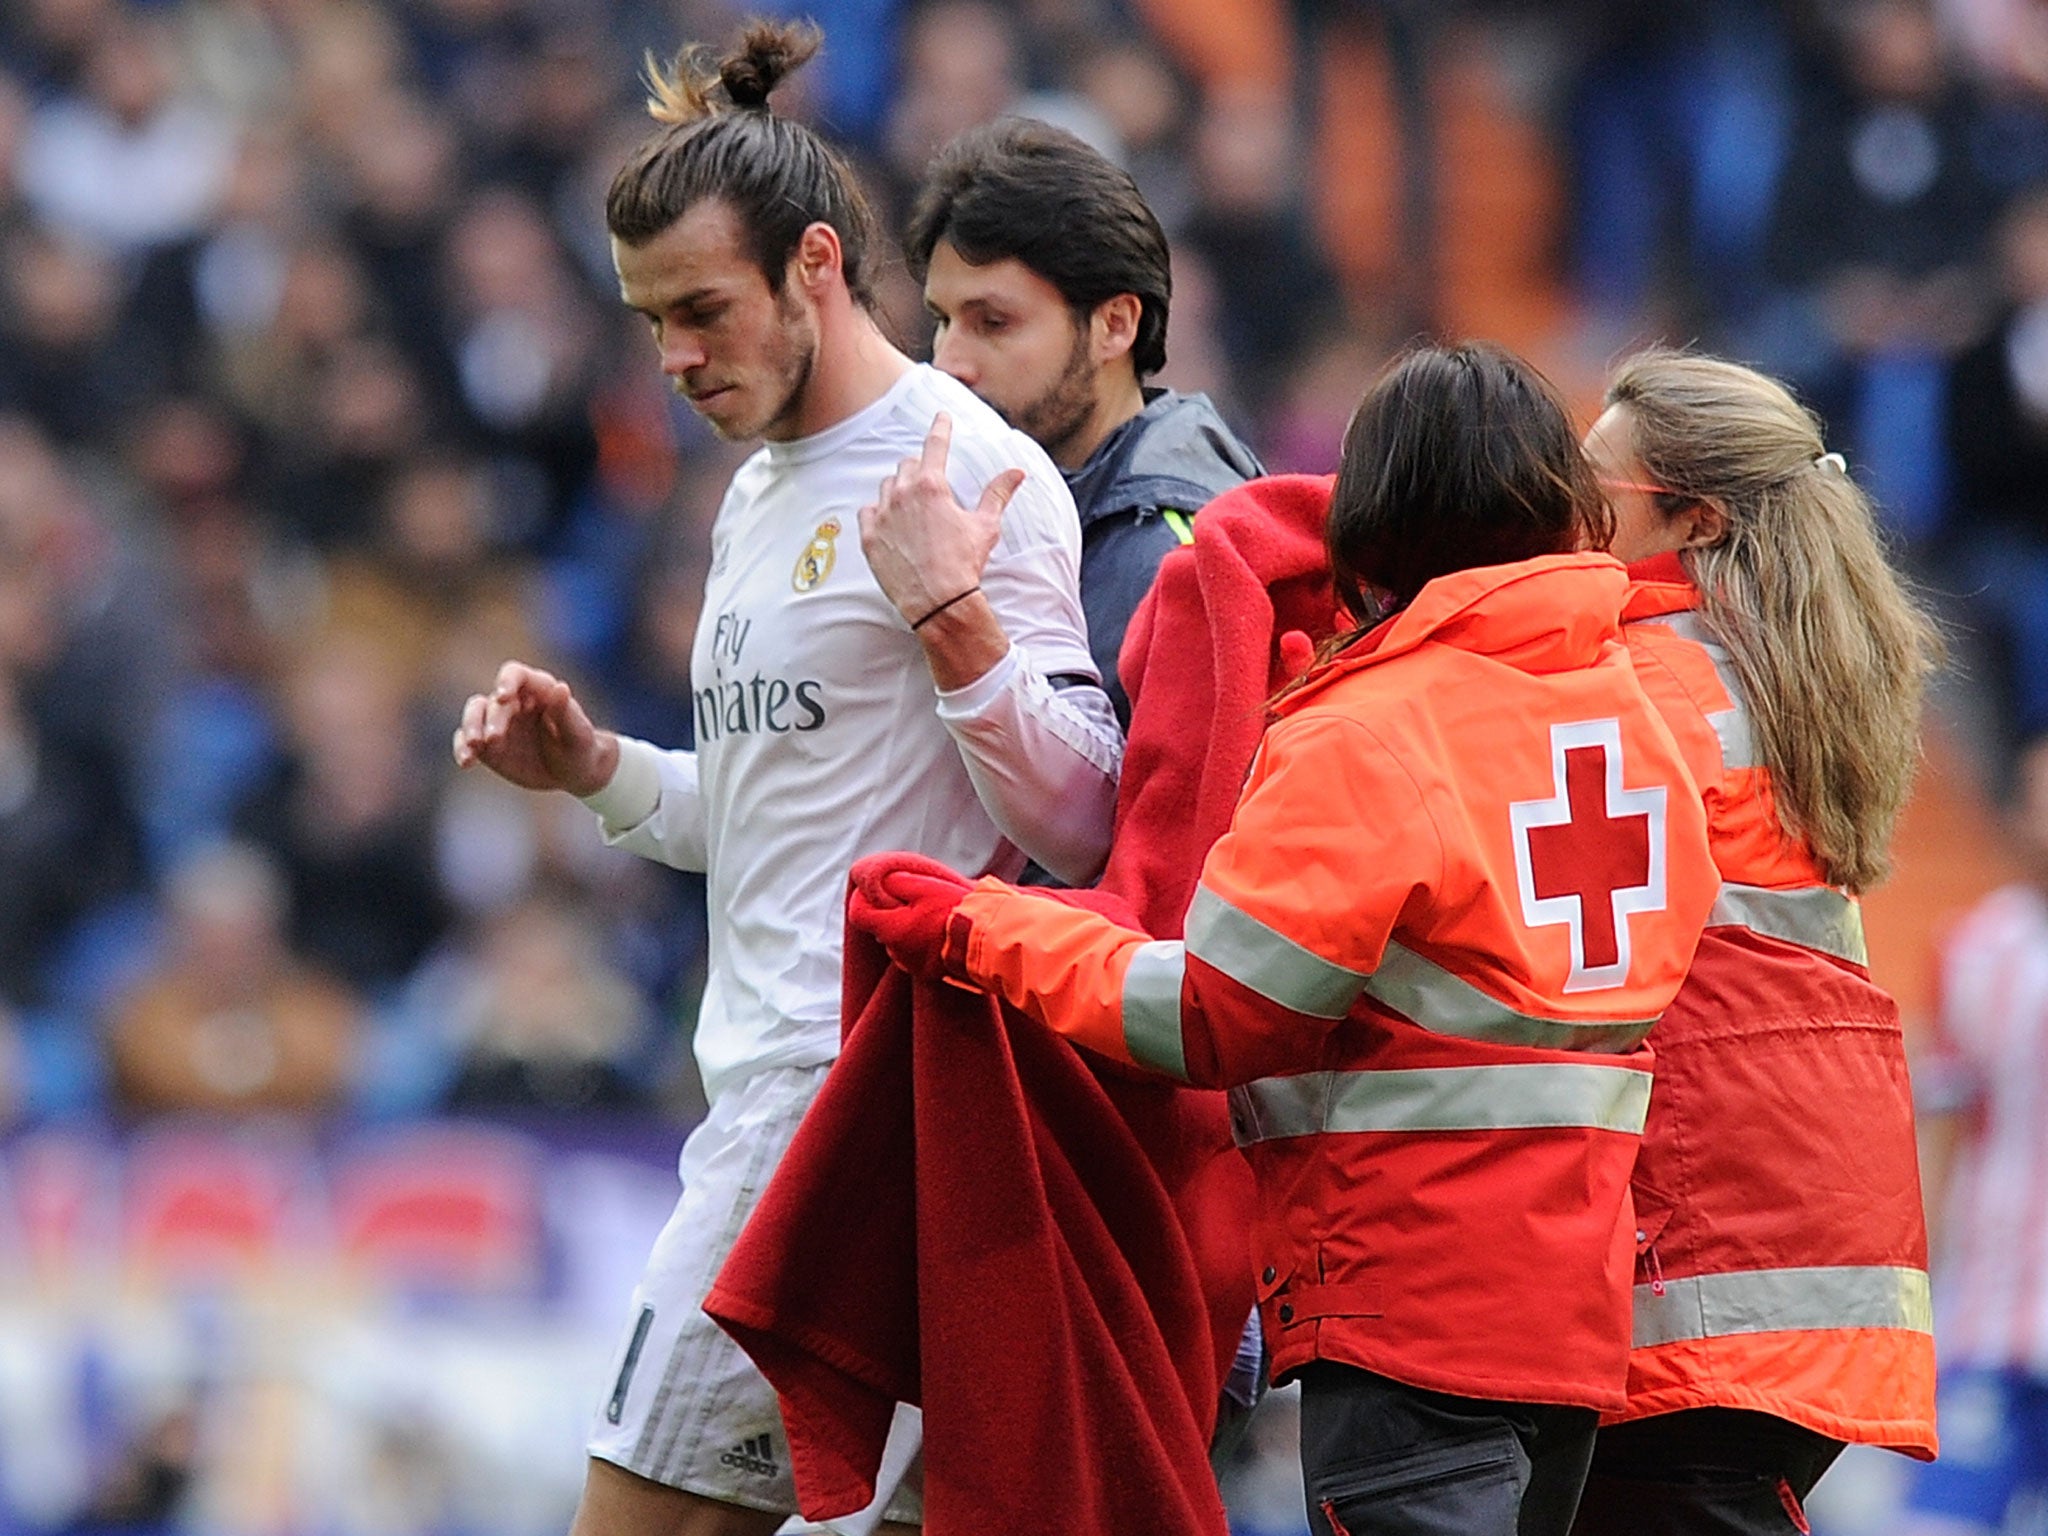 Gareth Bale has been ruled out for three weeks with a calf injury